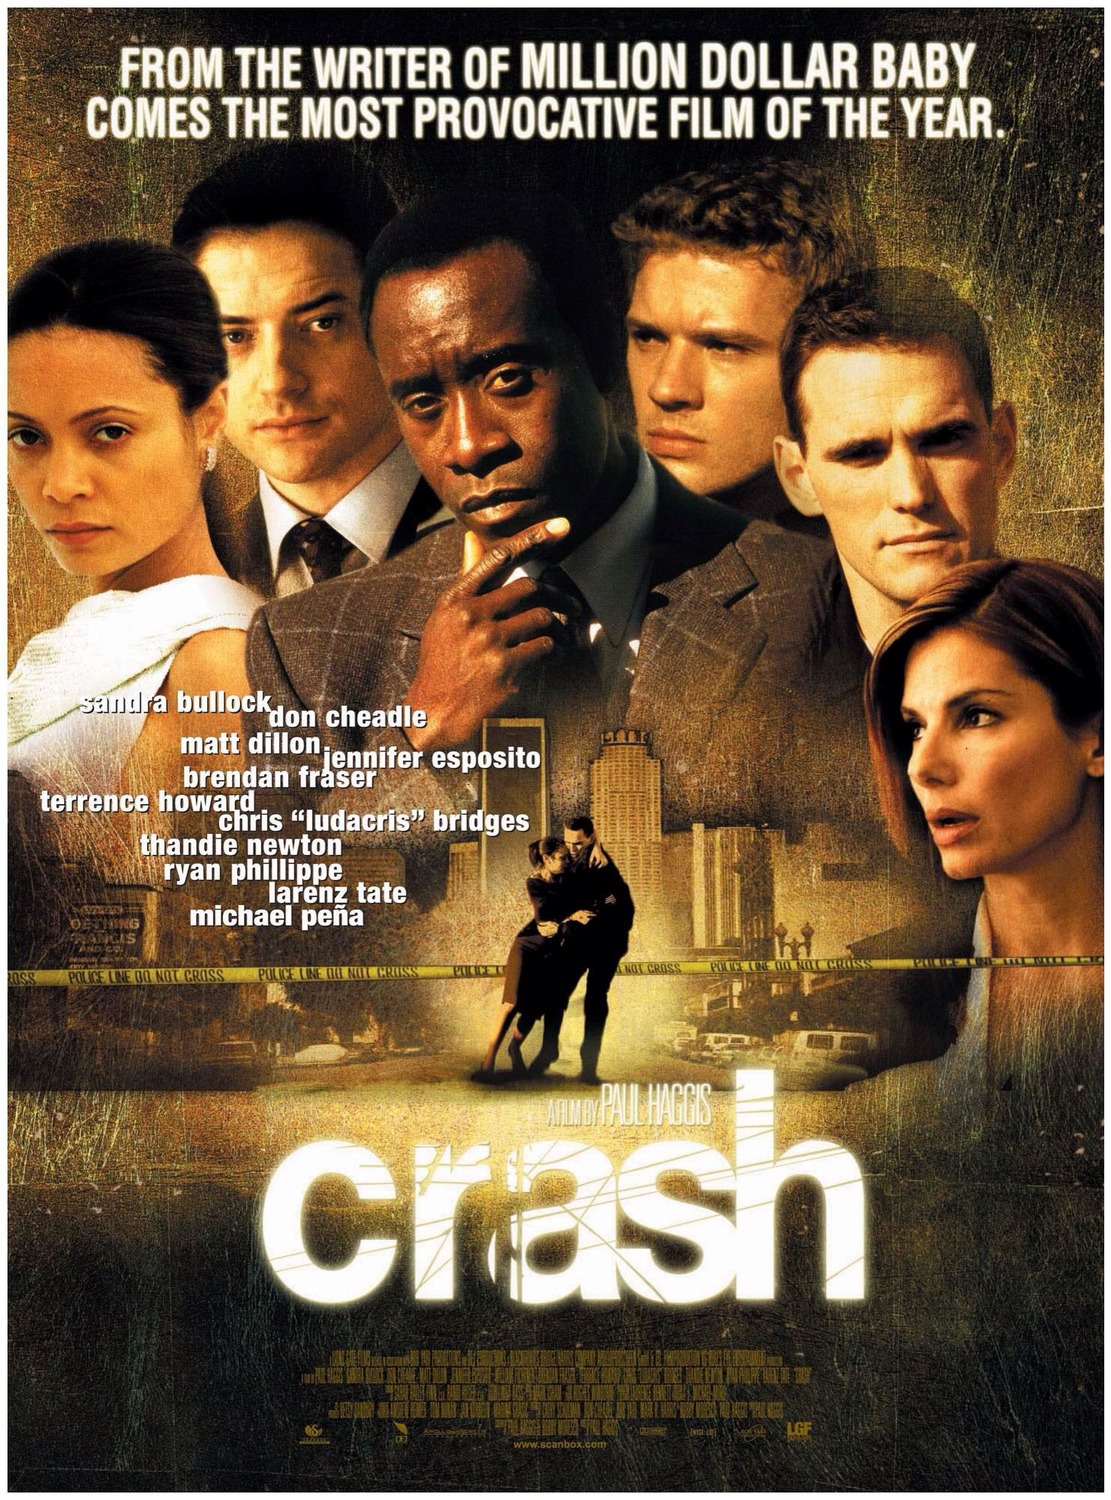 Extra Large Movie Poster Image for Crash (#3 of 8)